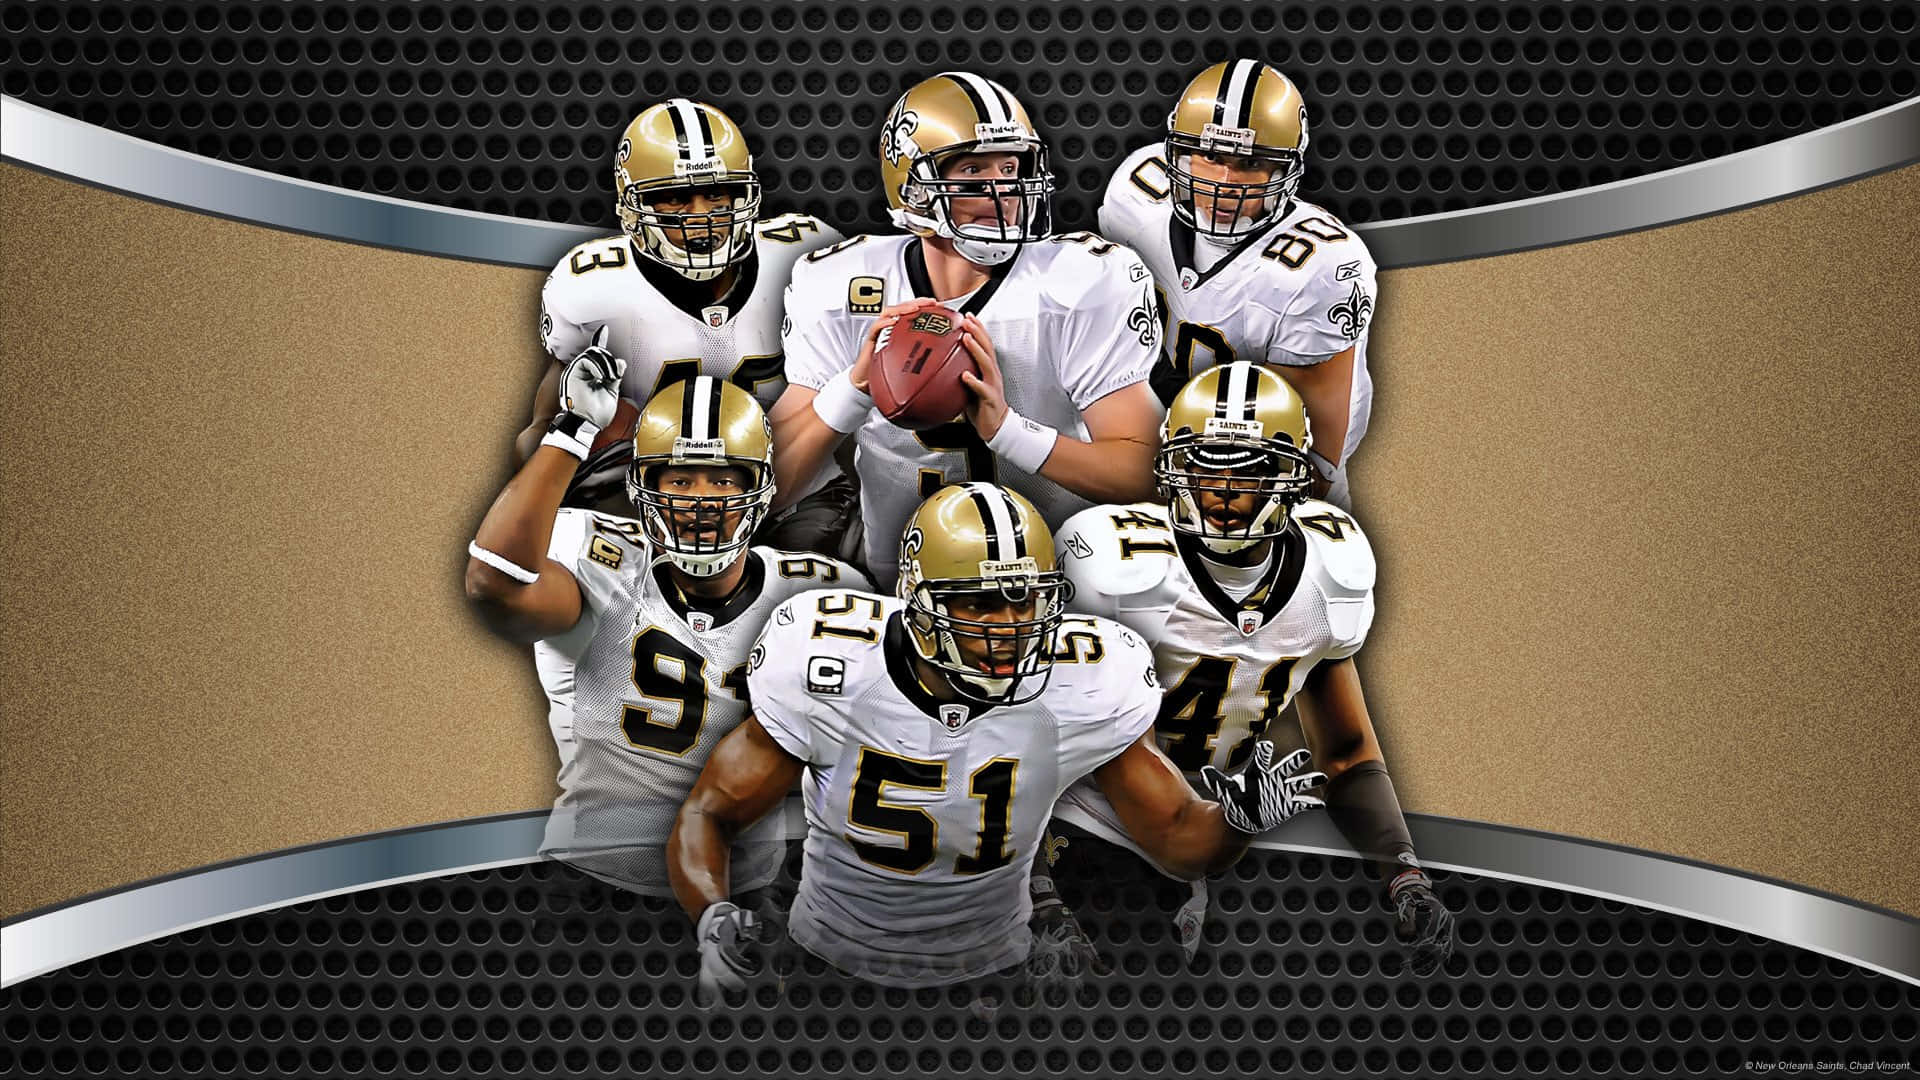 The New Orleans Saints Spread the Spirit of Victory Wallpaper